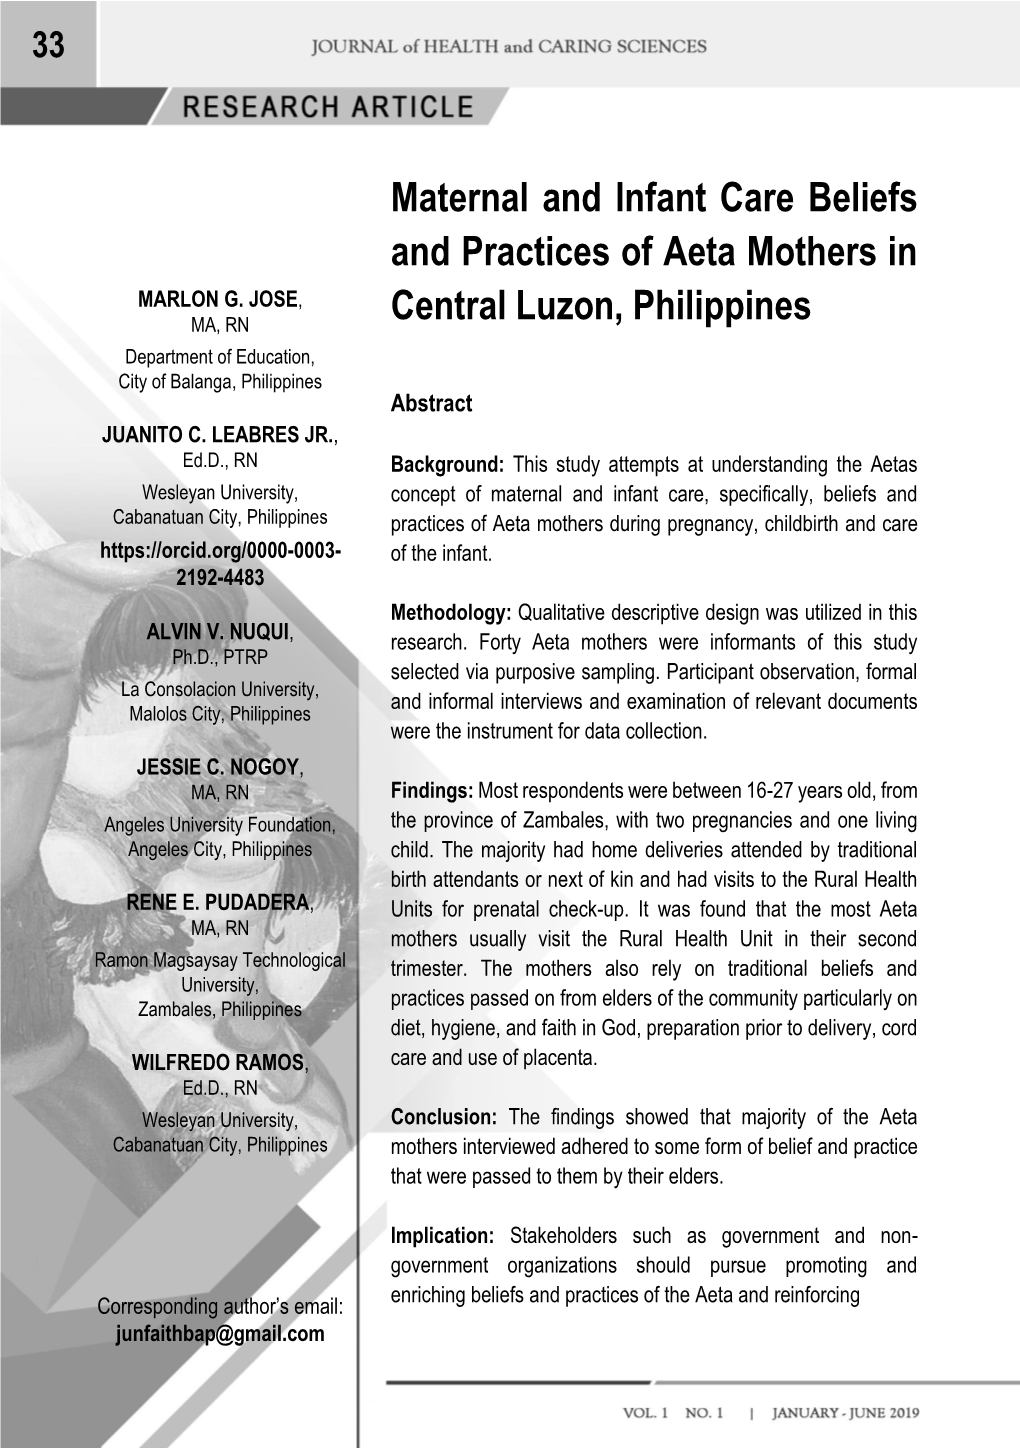 Maternal and Infant Care Beliefs and Practices of Aeta Mothers in Central